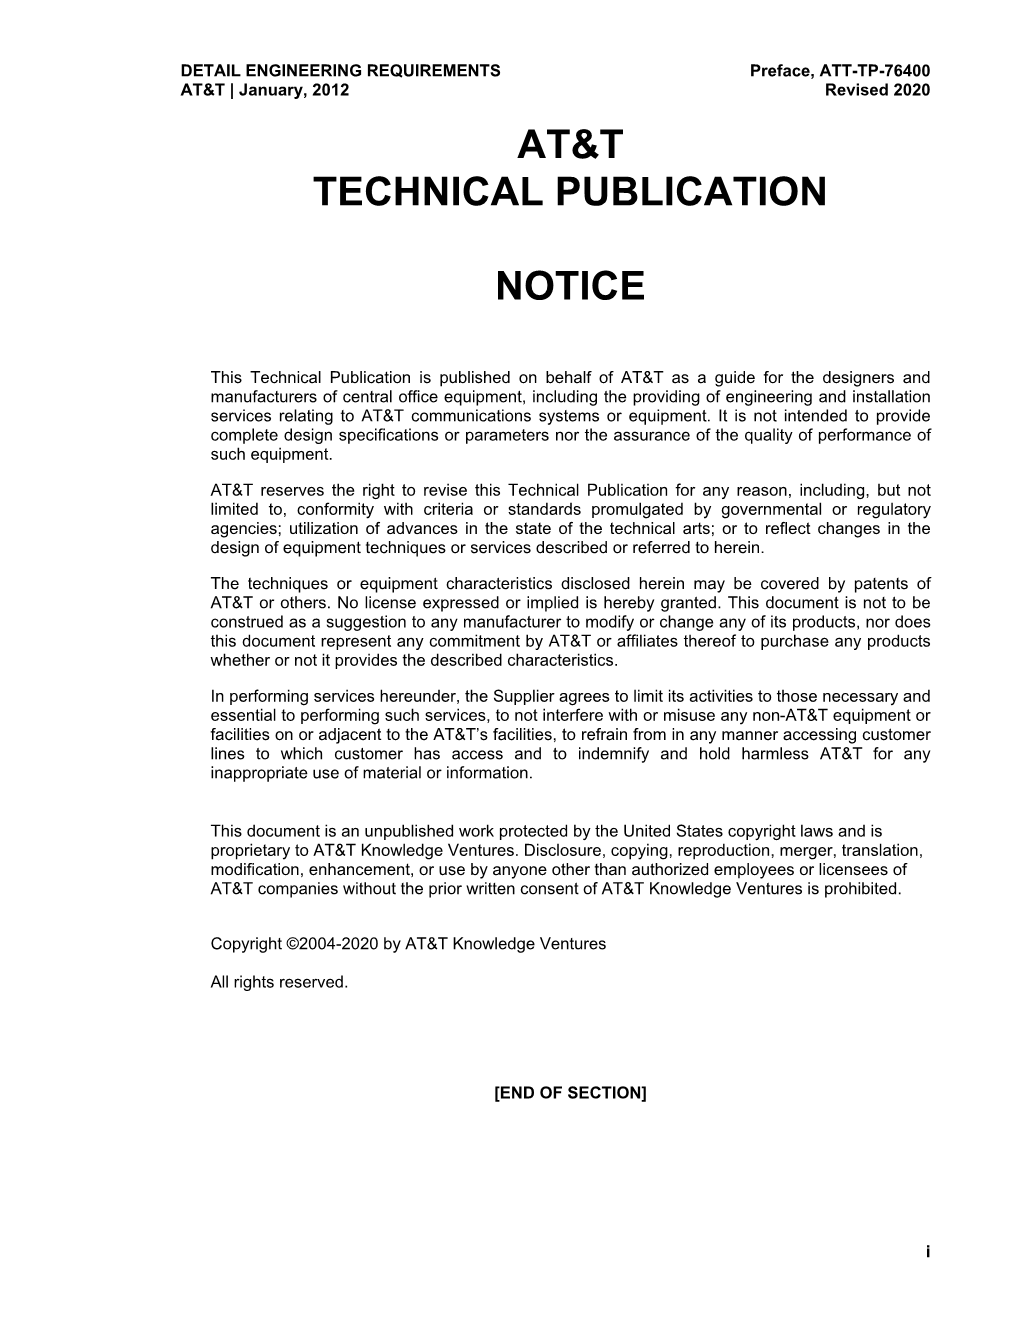 At&T Technical Publication Notice